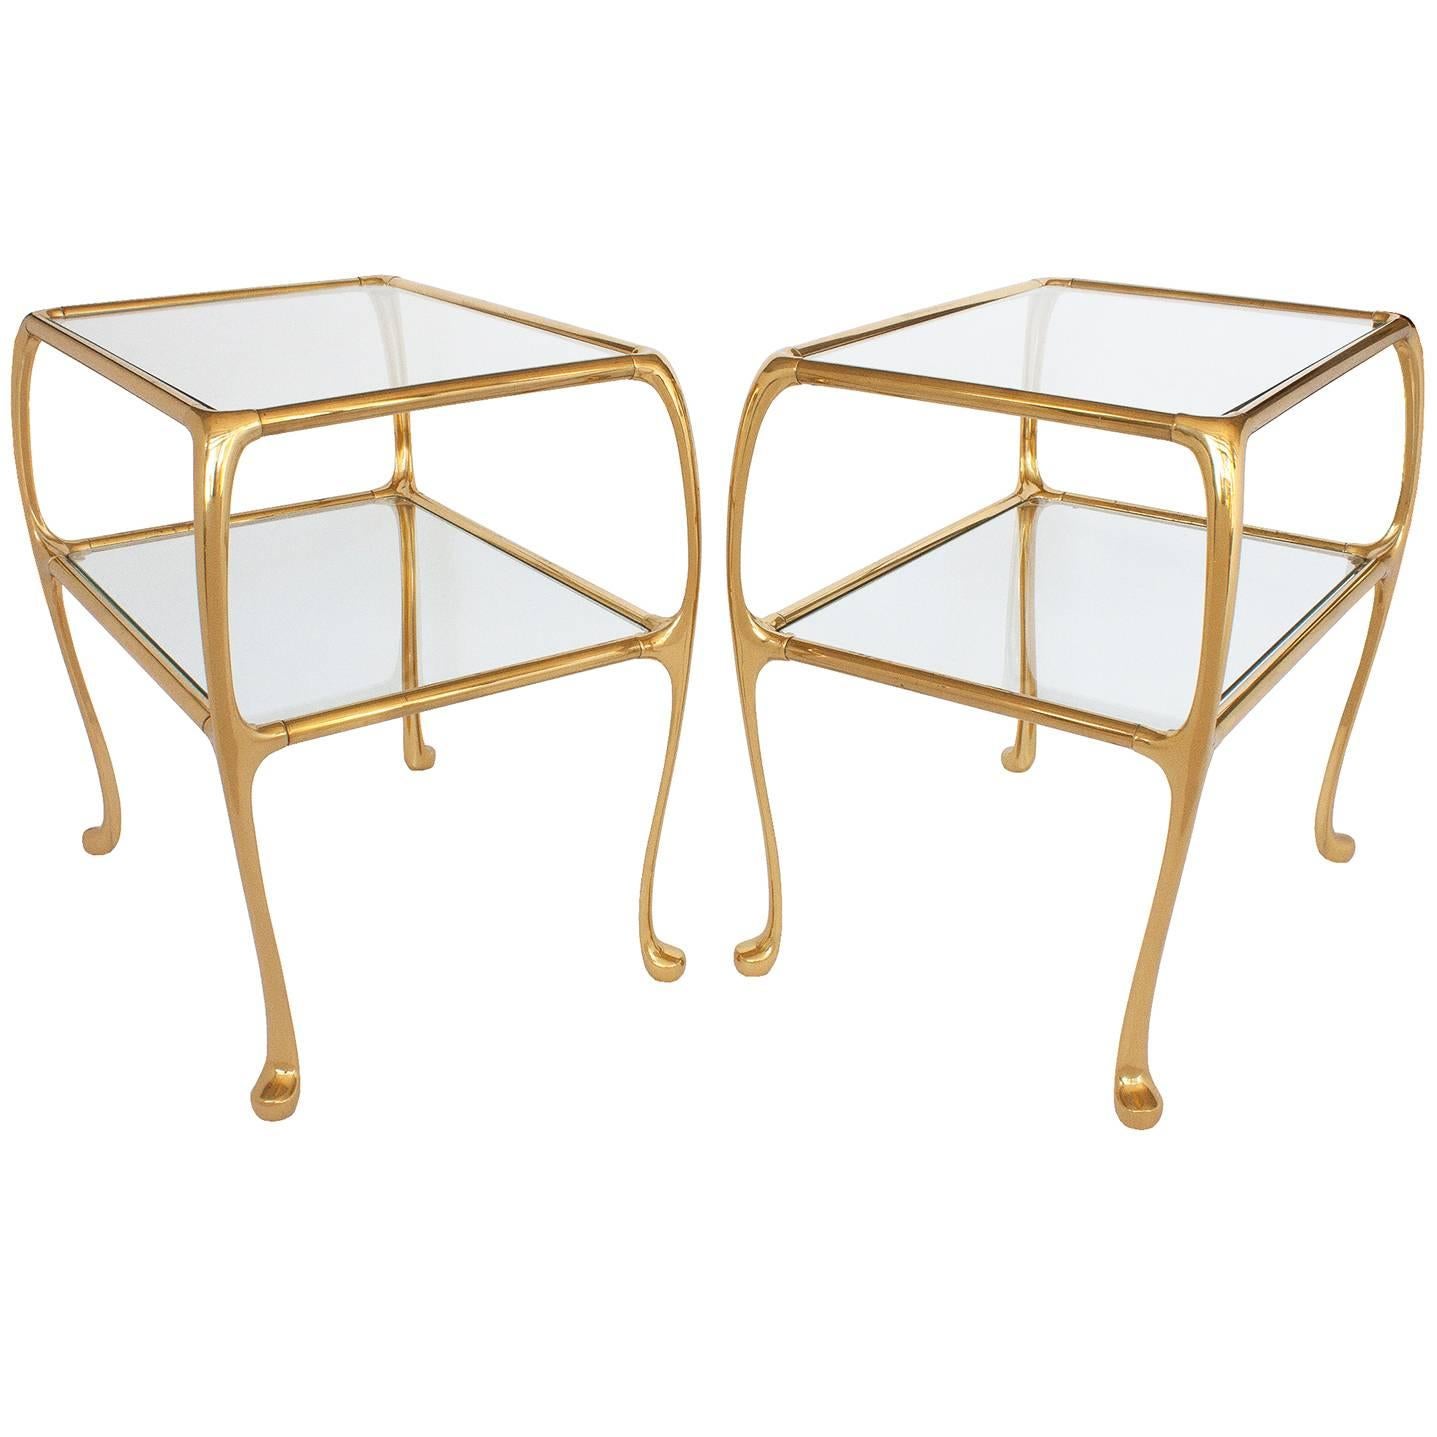 Pair of Gaudi Inspired Brass Two-Tier End Tables